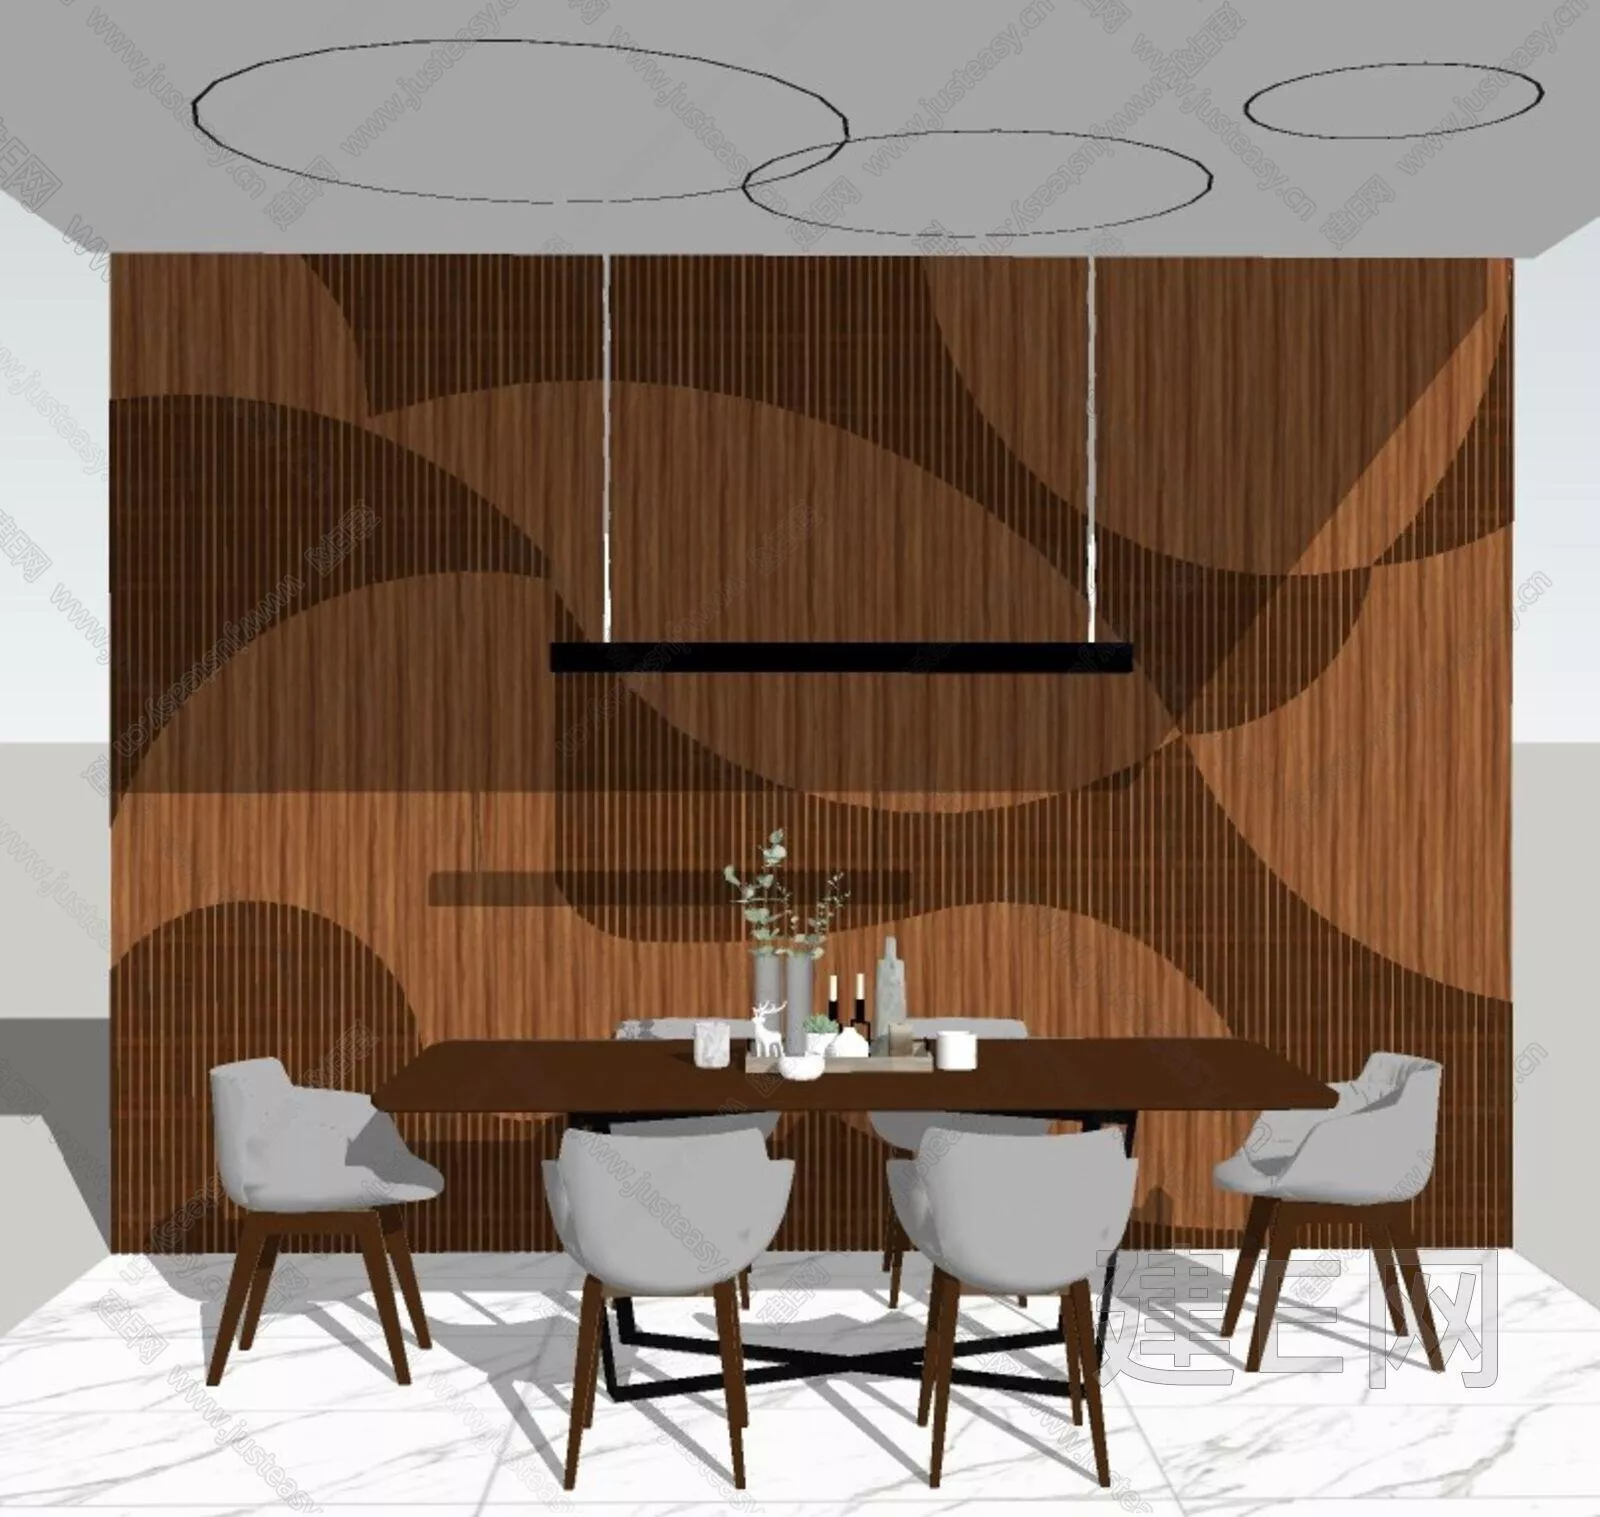 CHINESE DINING TABLE SET - SKETCHUP 3D MODEL - ENSCAPE - 113197324